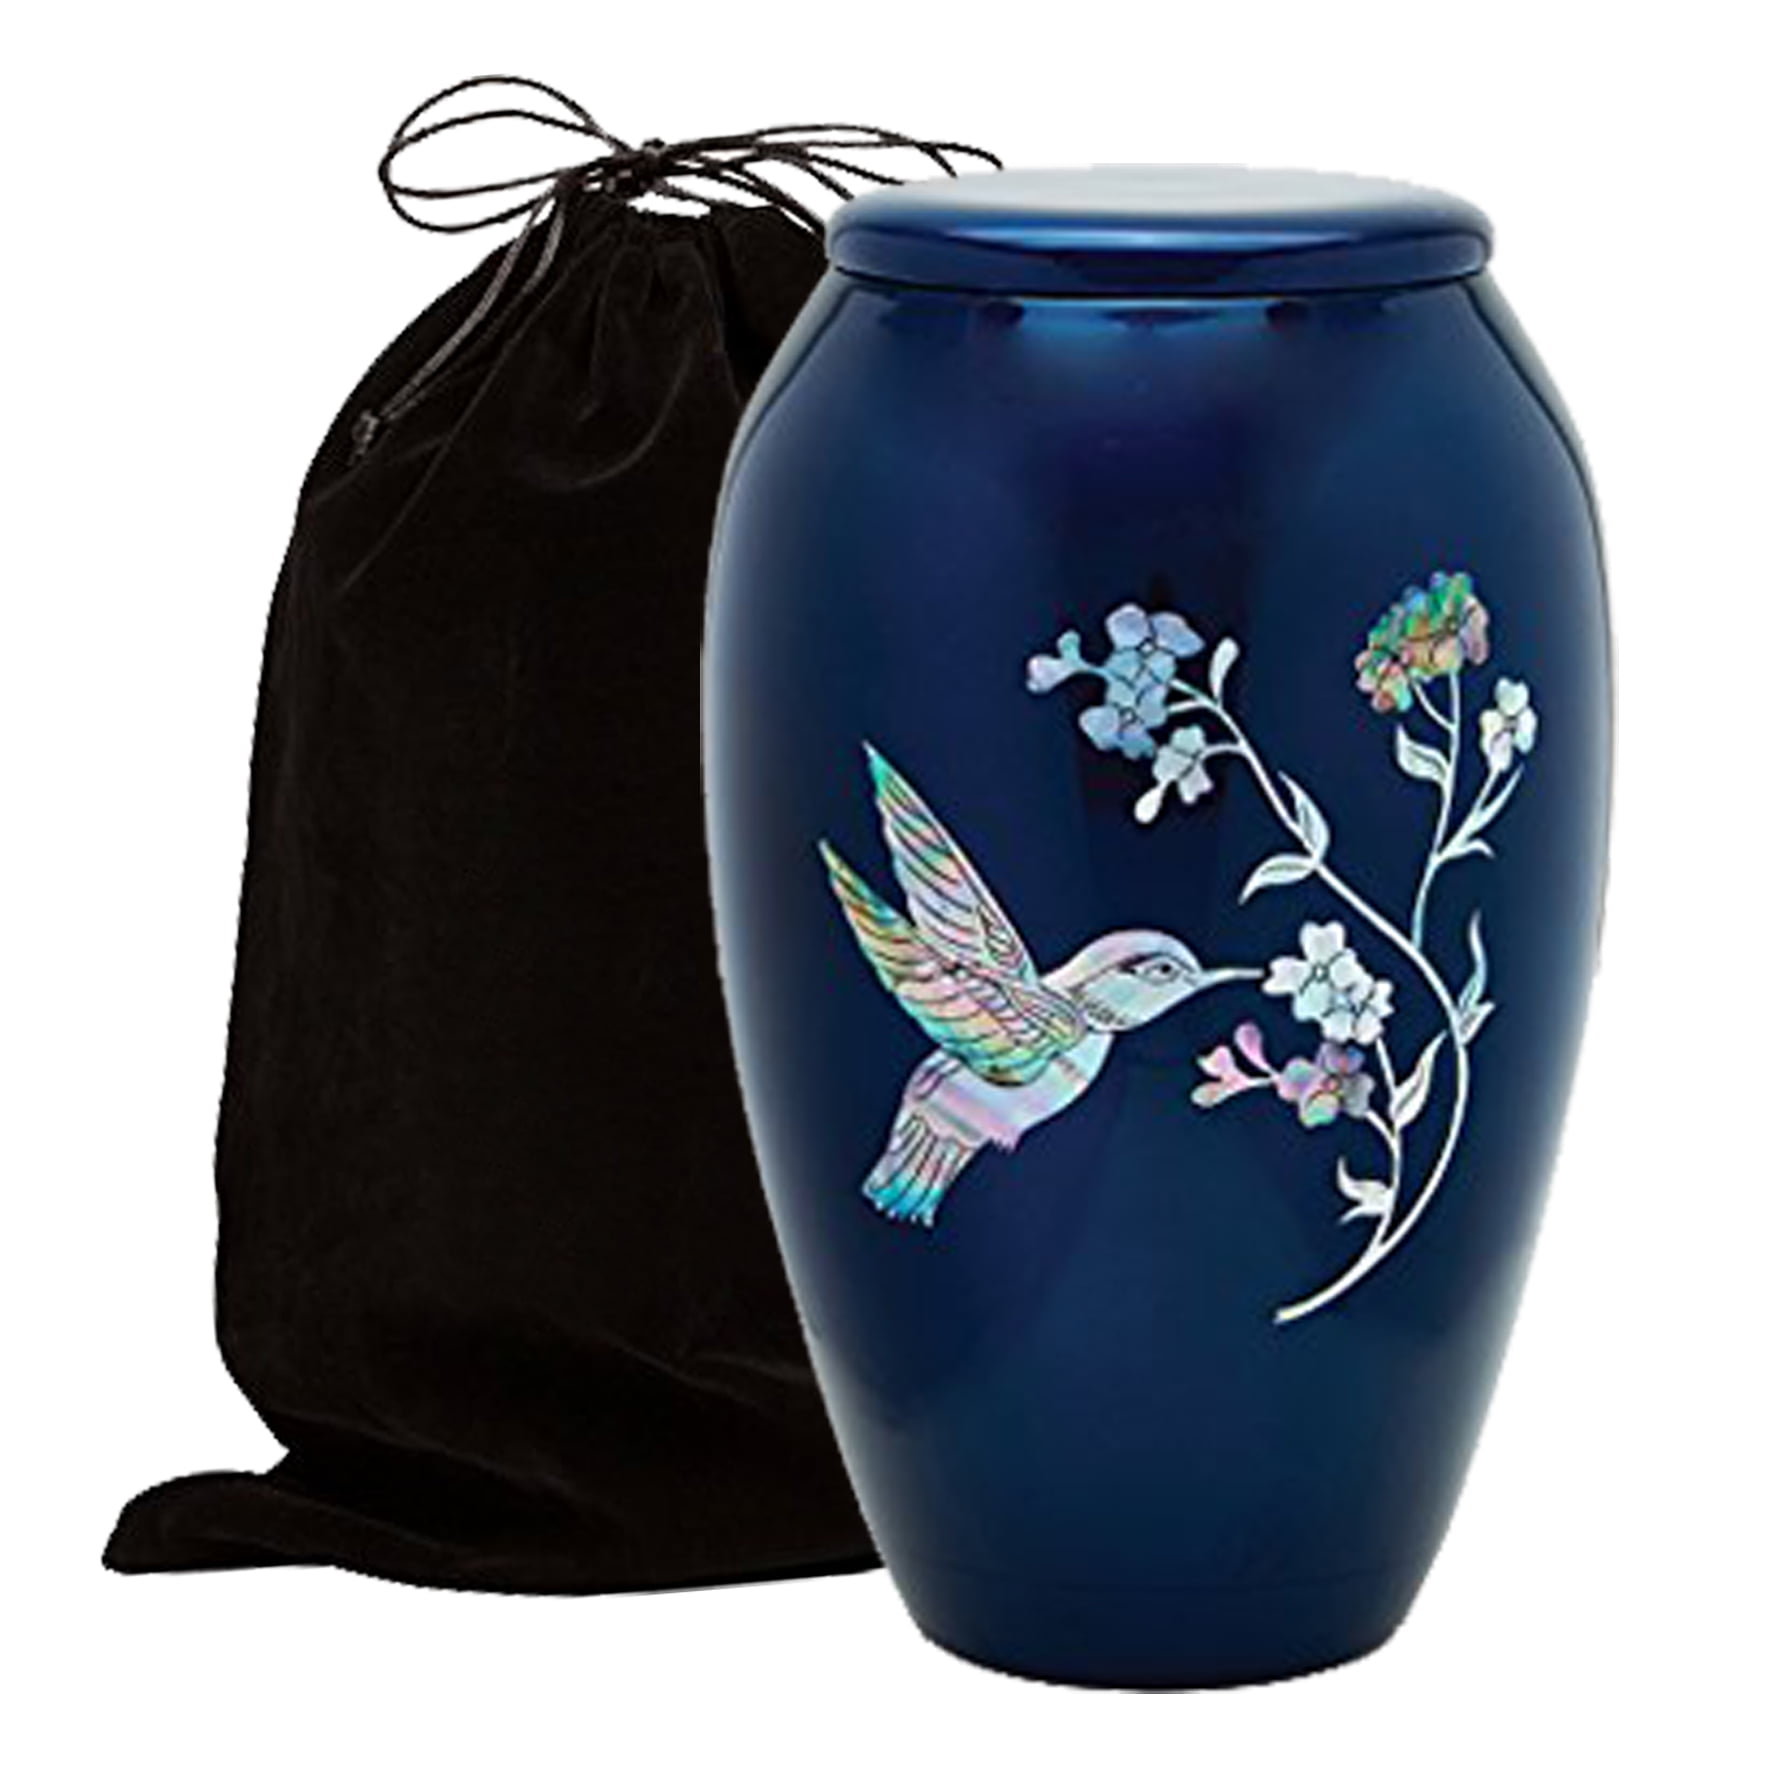 Mother of Pearl Inlaid Metal Cremation Urn - MOP Cremation Urn - Solid  Metal Funeral Urn - Handcrafted Adult Funeral Urn for Ashes - Great Urn  Deal with Free Bag (Blue Hummingbird) 